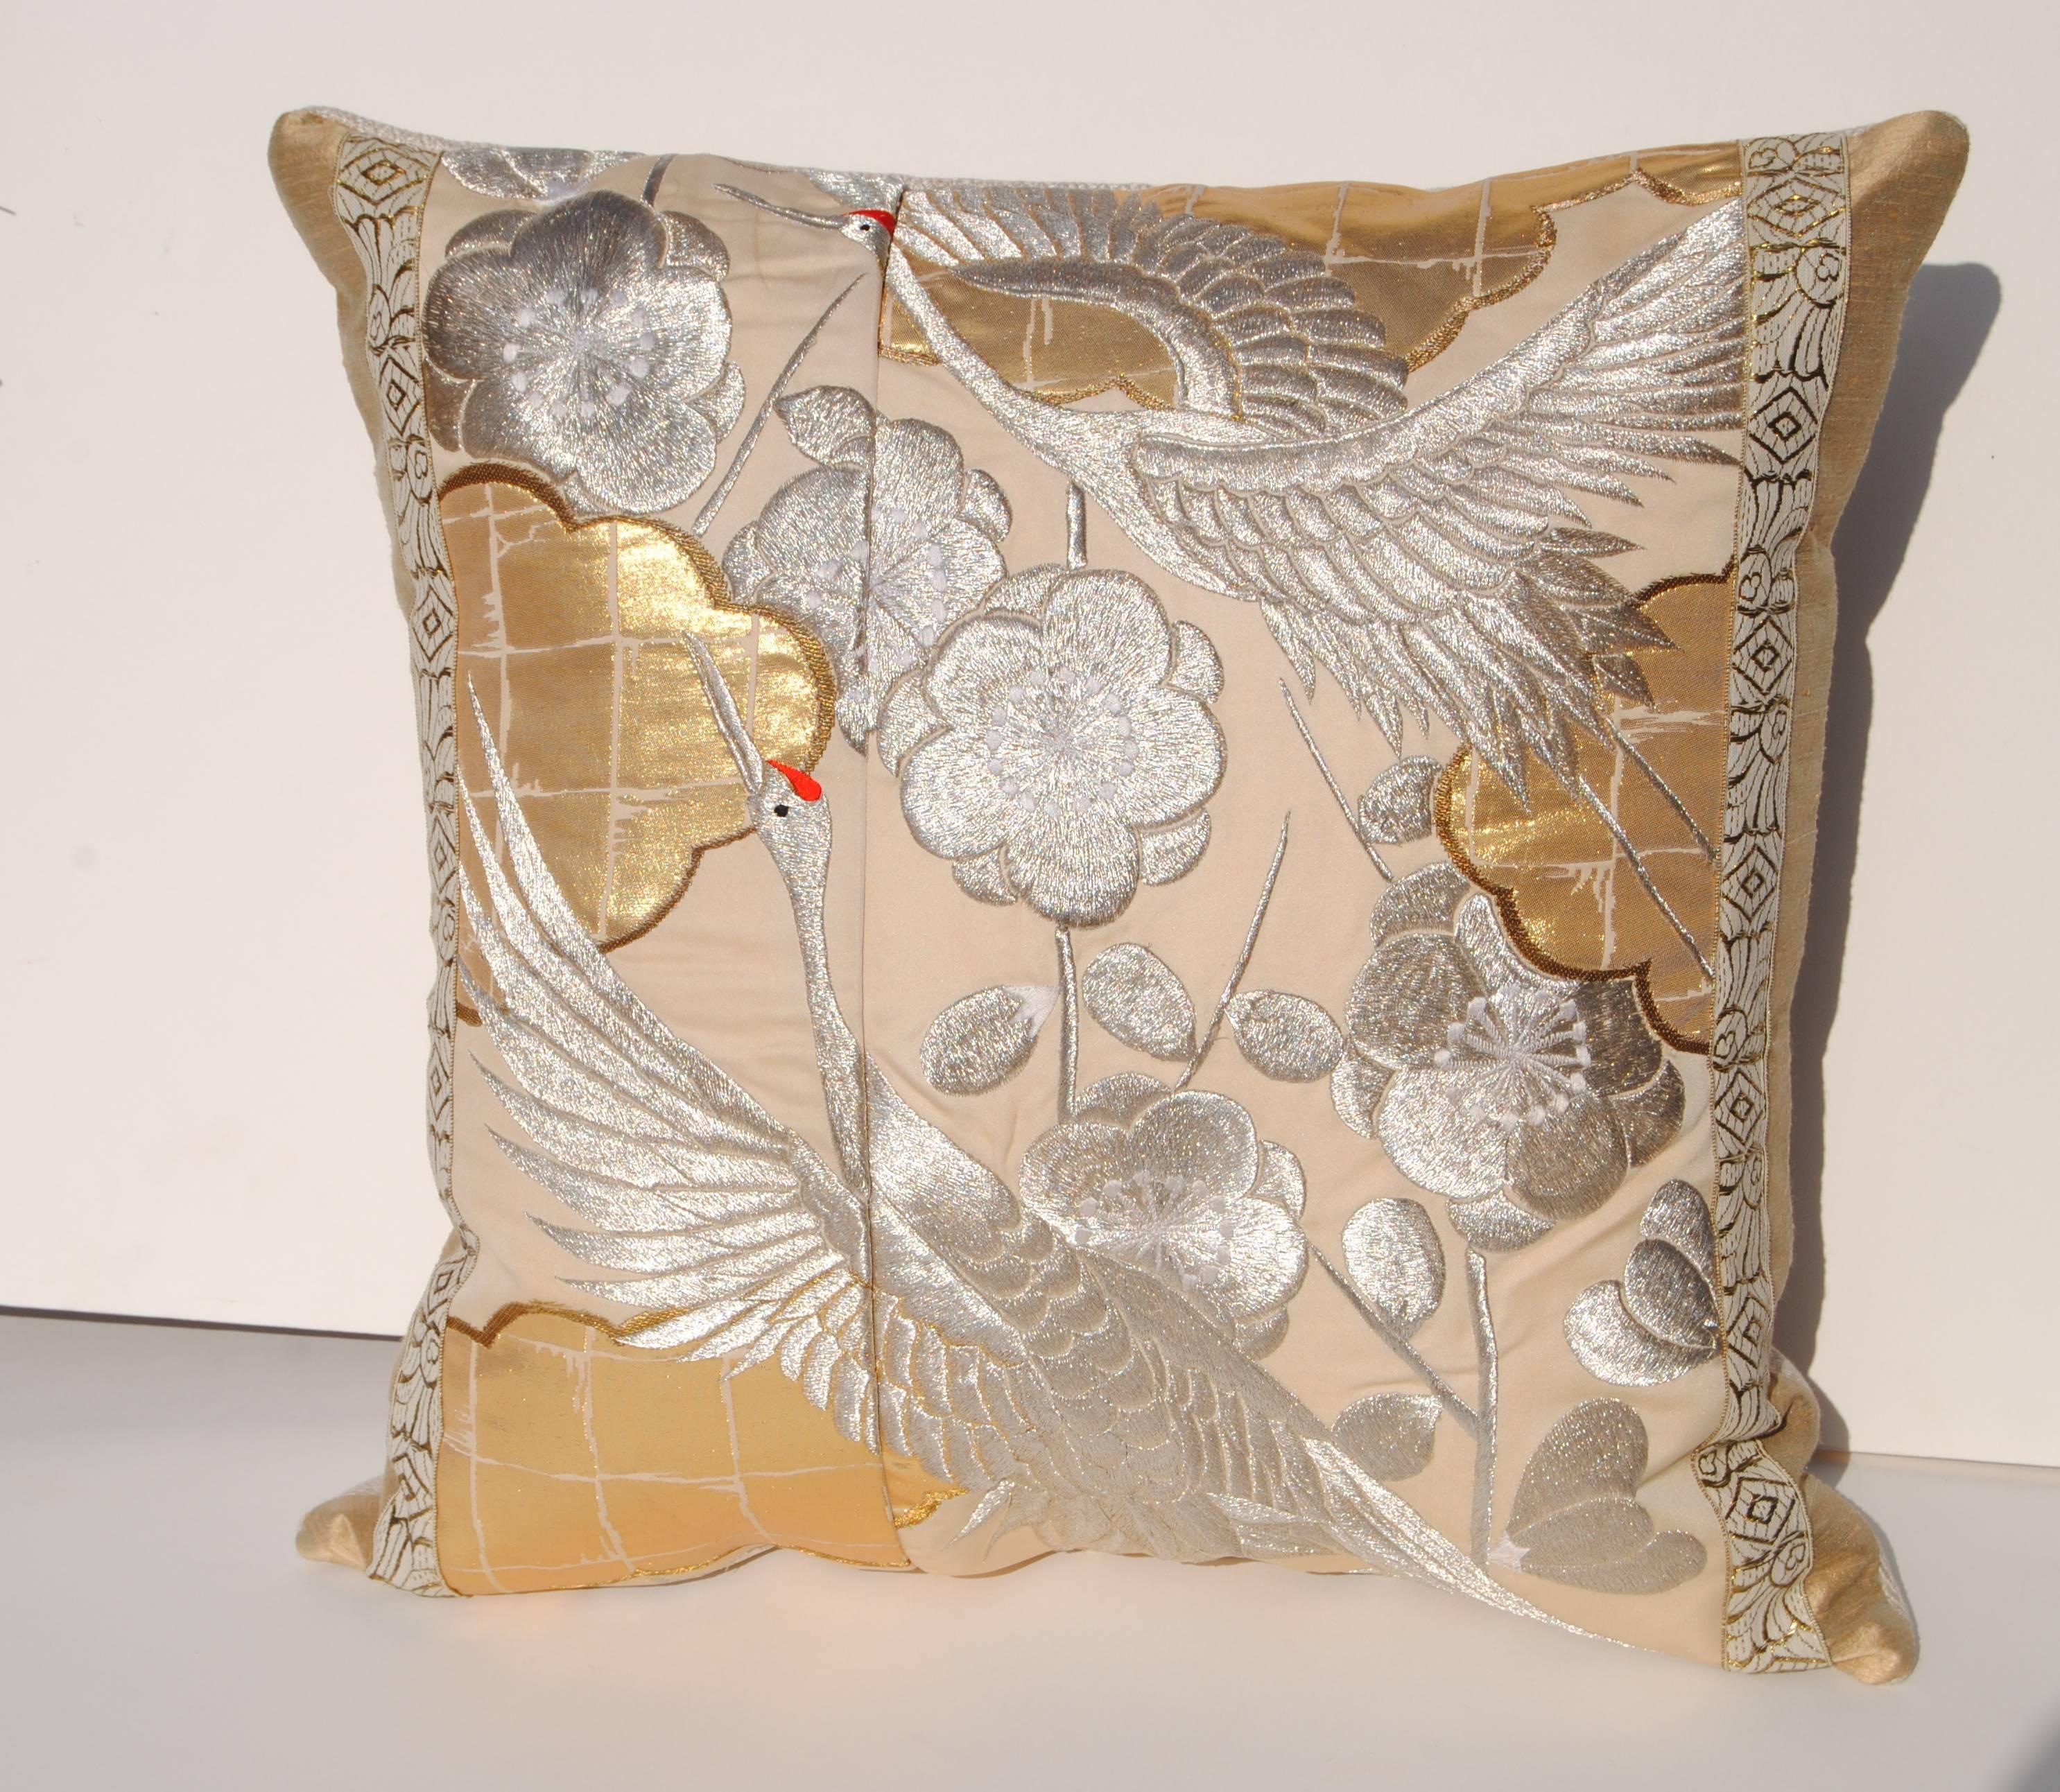 Two custom pillows cut from a vintage silk Japanese wedding kimono.  Exquisite silk embroidery in silver and white.  Pillows are faced with a beige silk and backed in cream linen.  They are filled with an insert of 50/50 down and feathers and hand